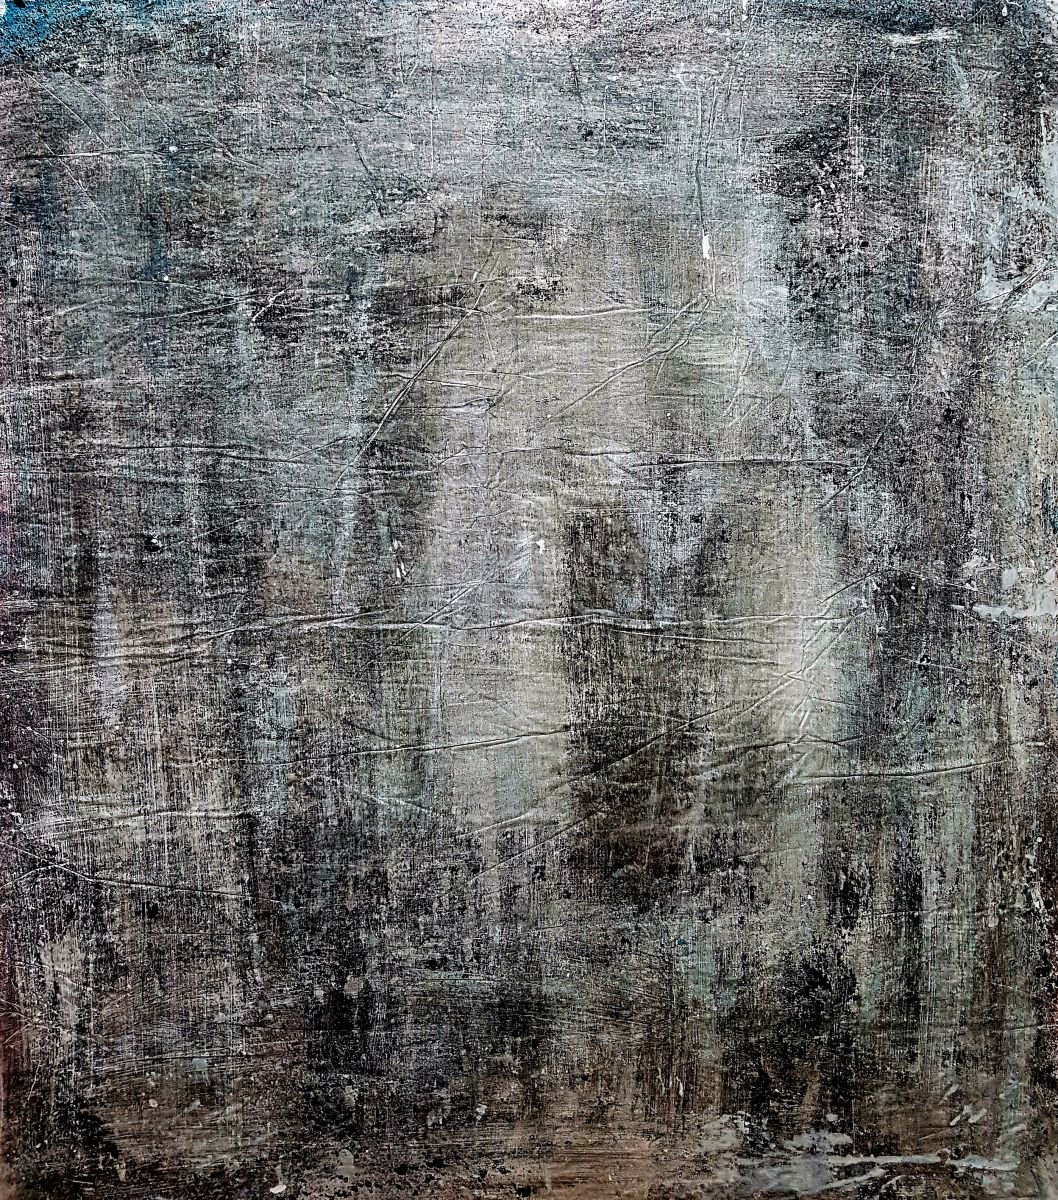 Moonlight -01- (n.347) - 80,00 x 90,00 x 2,50 cm - ready to hang - acrylic painting on str... by Alessio Mazzarulli